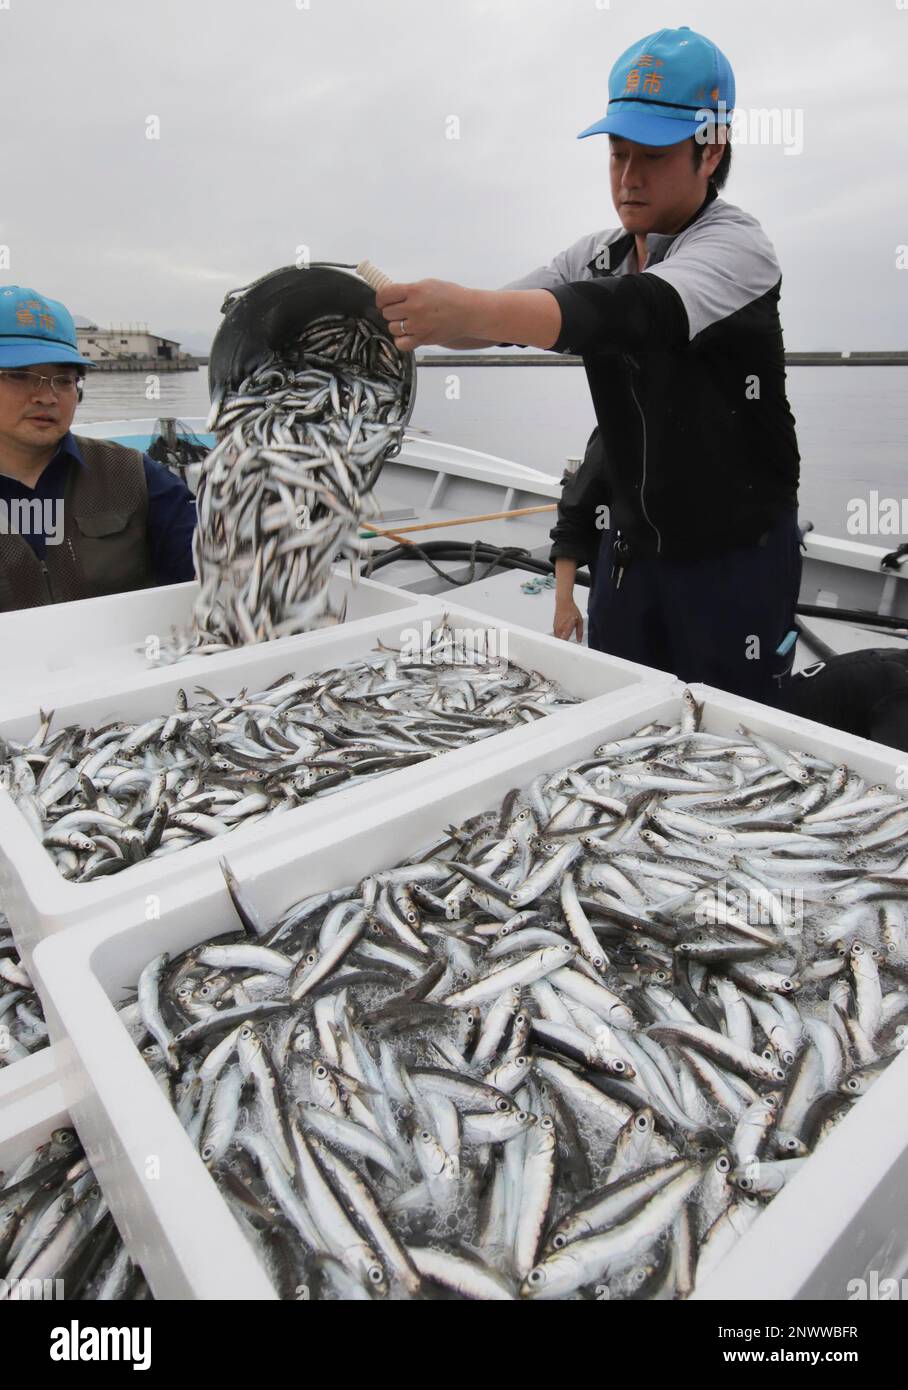 Engraulis japonica are landed at Hiroshima central wholesale market in Hiroshima City, Hiroshima prefecture on June 11, 2018, the opening day of fishing Katakuchi Iwashi. 10 to 12 centimeters silver fish were packed and sold by bidding. They will be bigger and fatter toward summer. The fishing season will run through late August.( The Yomiuri Shimbun via AP Images ) Stock Photo